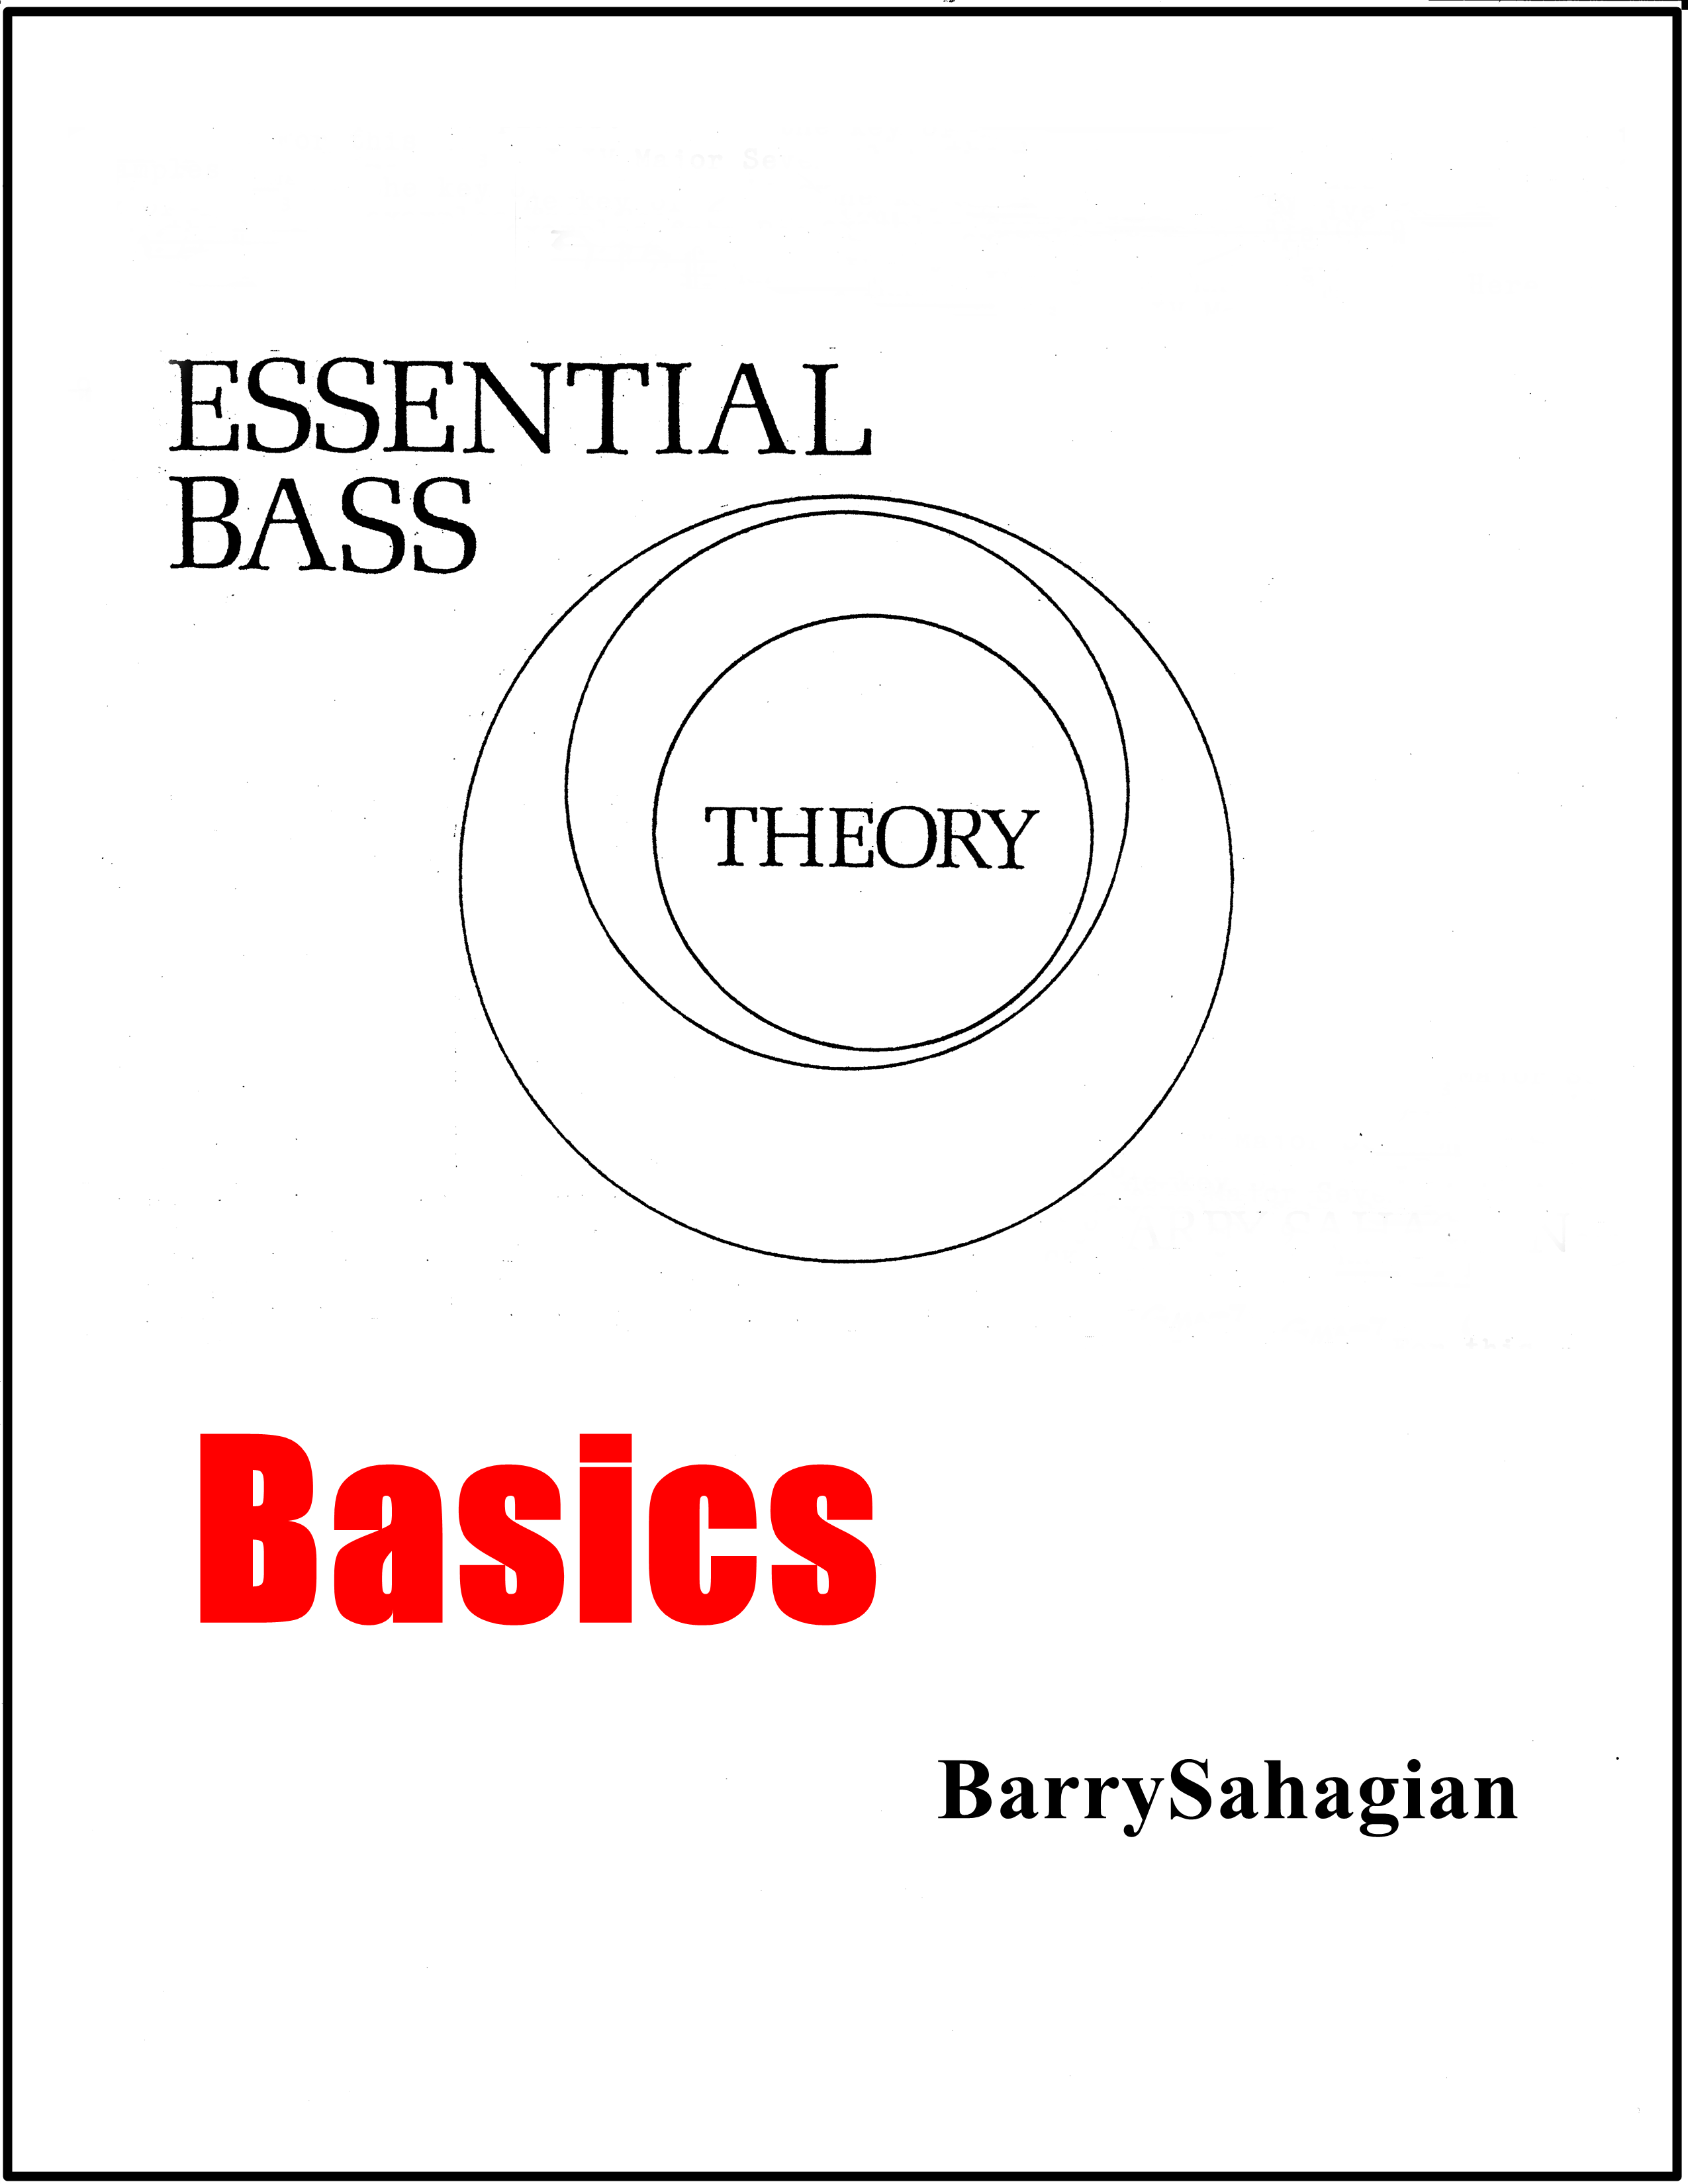 Essential Bass Theory Basics Physical Book Free Shipping